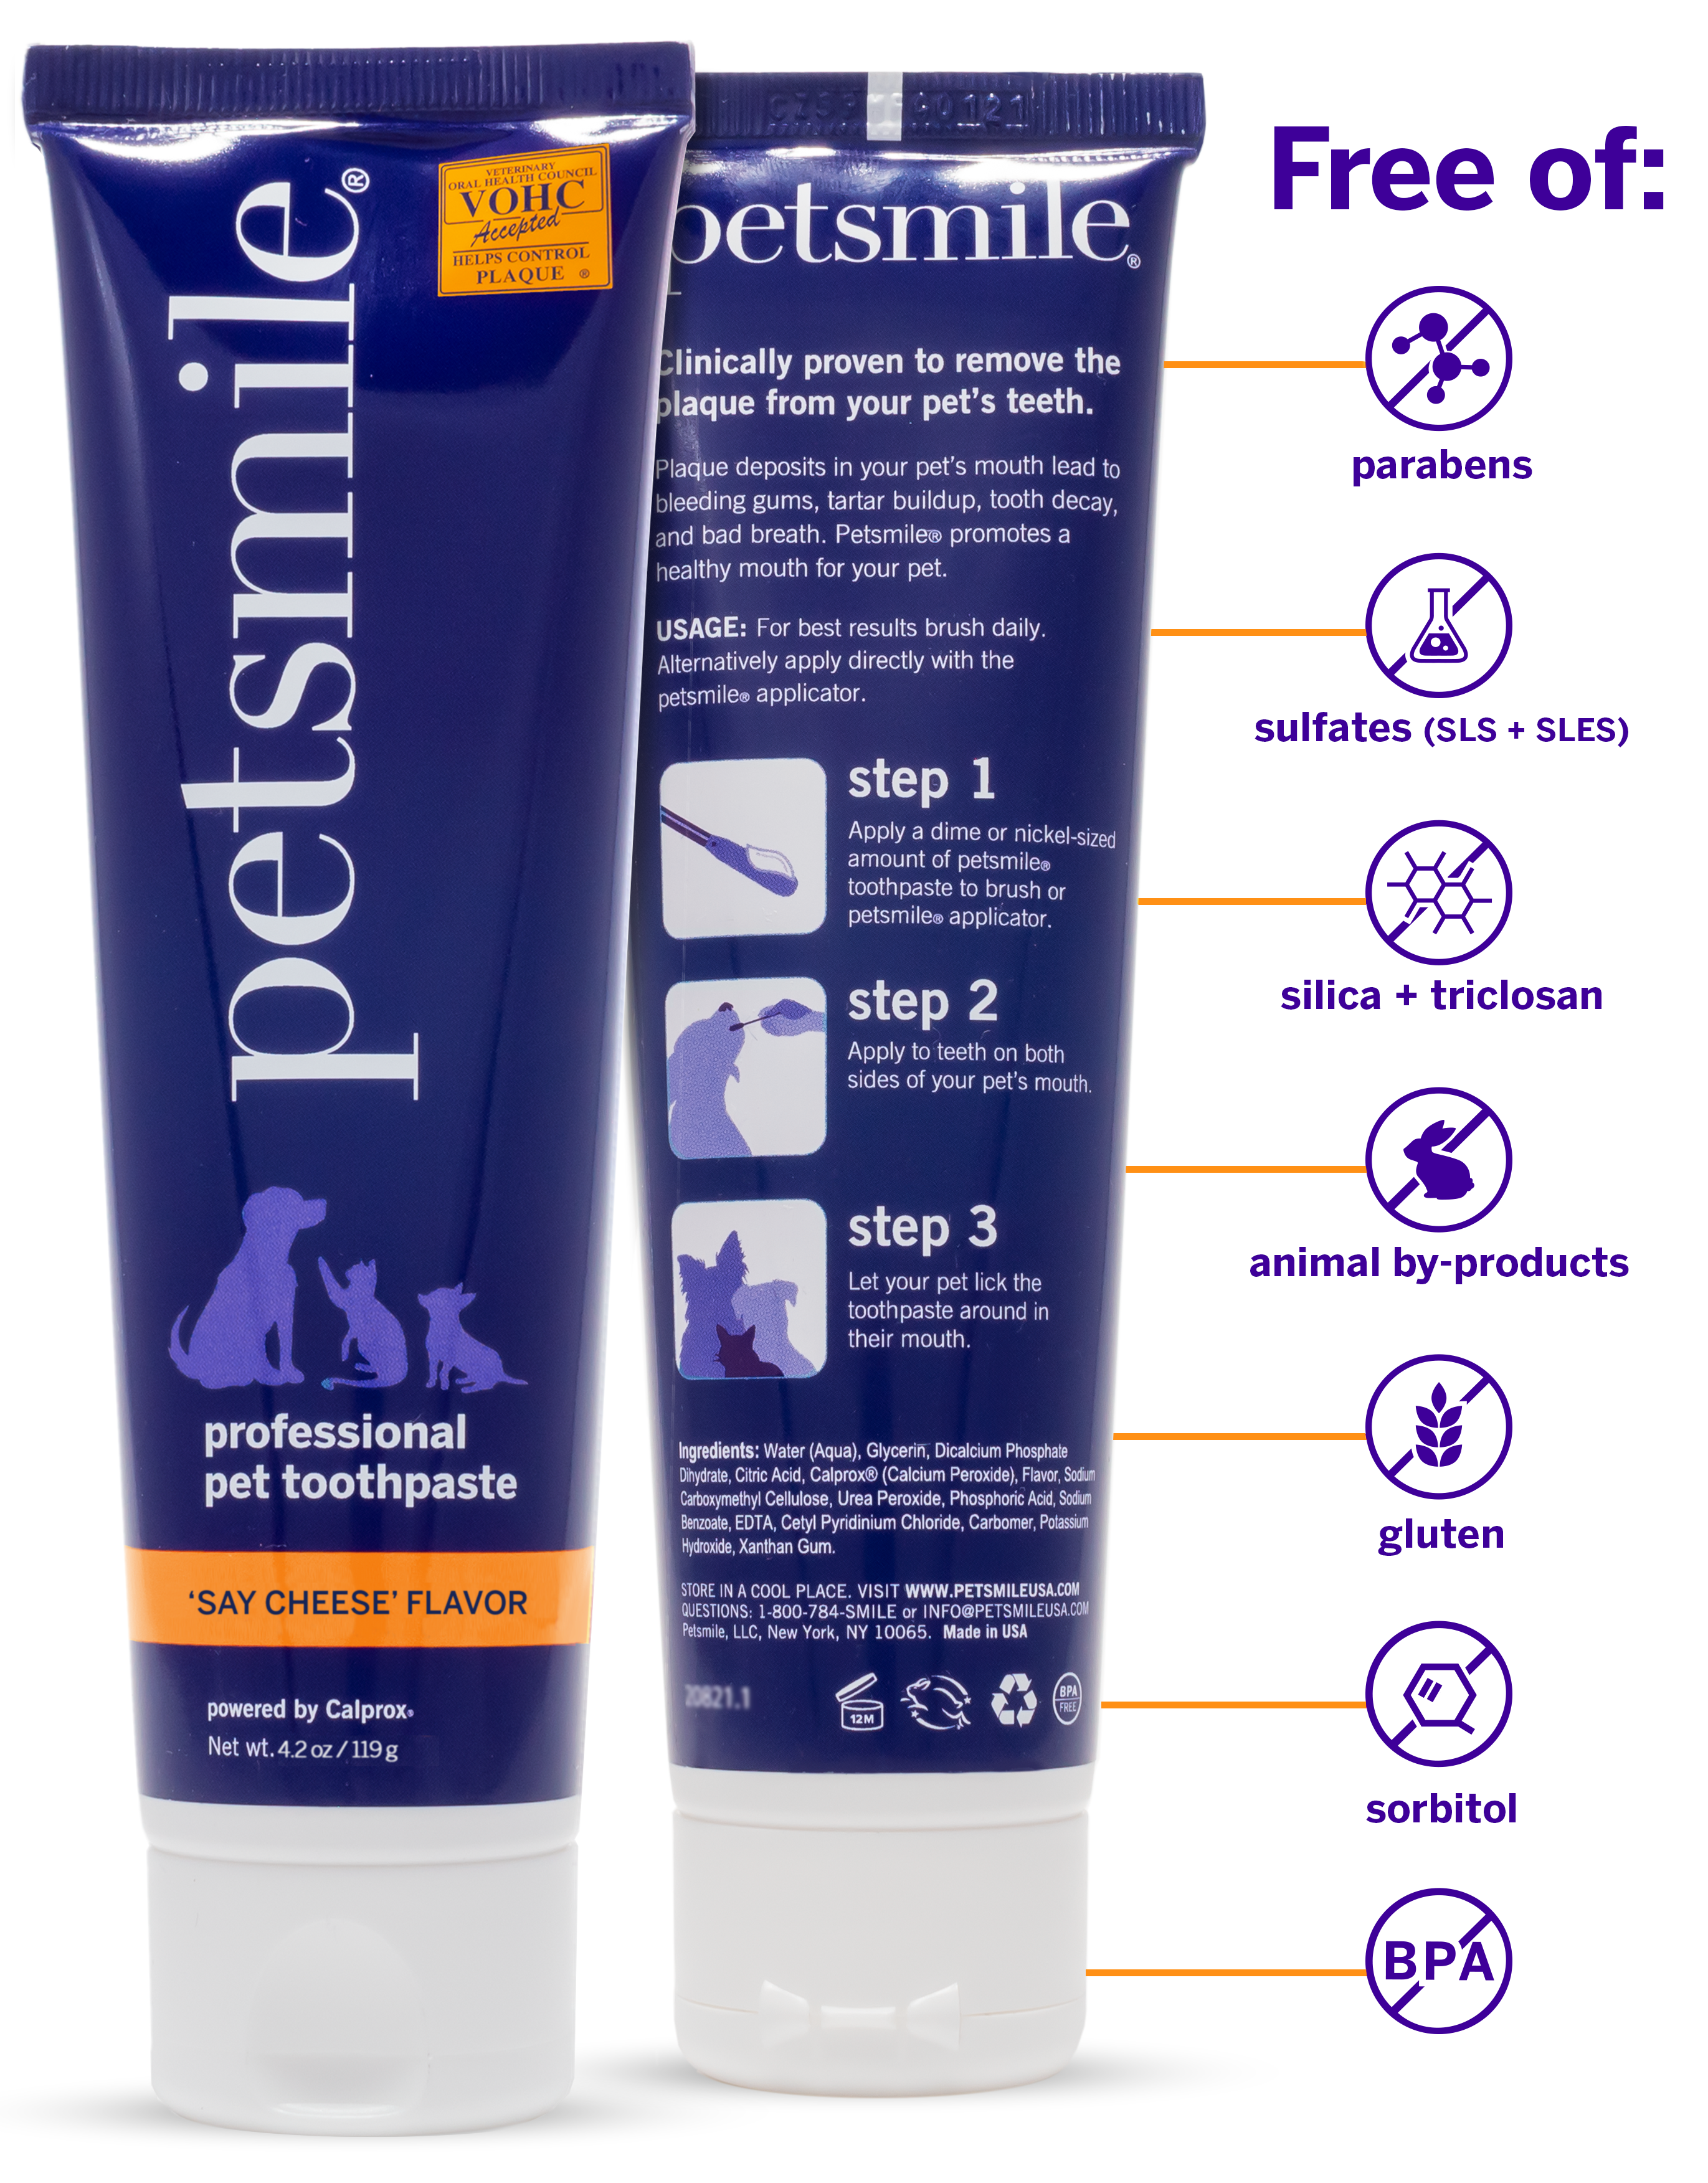 Improved dental health, fresher breath , Large tube of Say Cheese flavor , Large purple tube of petsmile dog toothpaste , BPA-free, vegan, VOHC certified , 2.5 OZ of Say Cheese flavor dog toothpaste